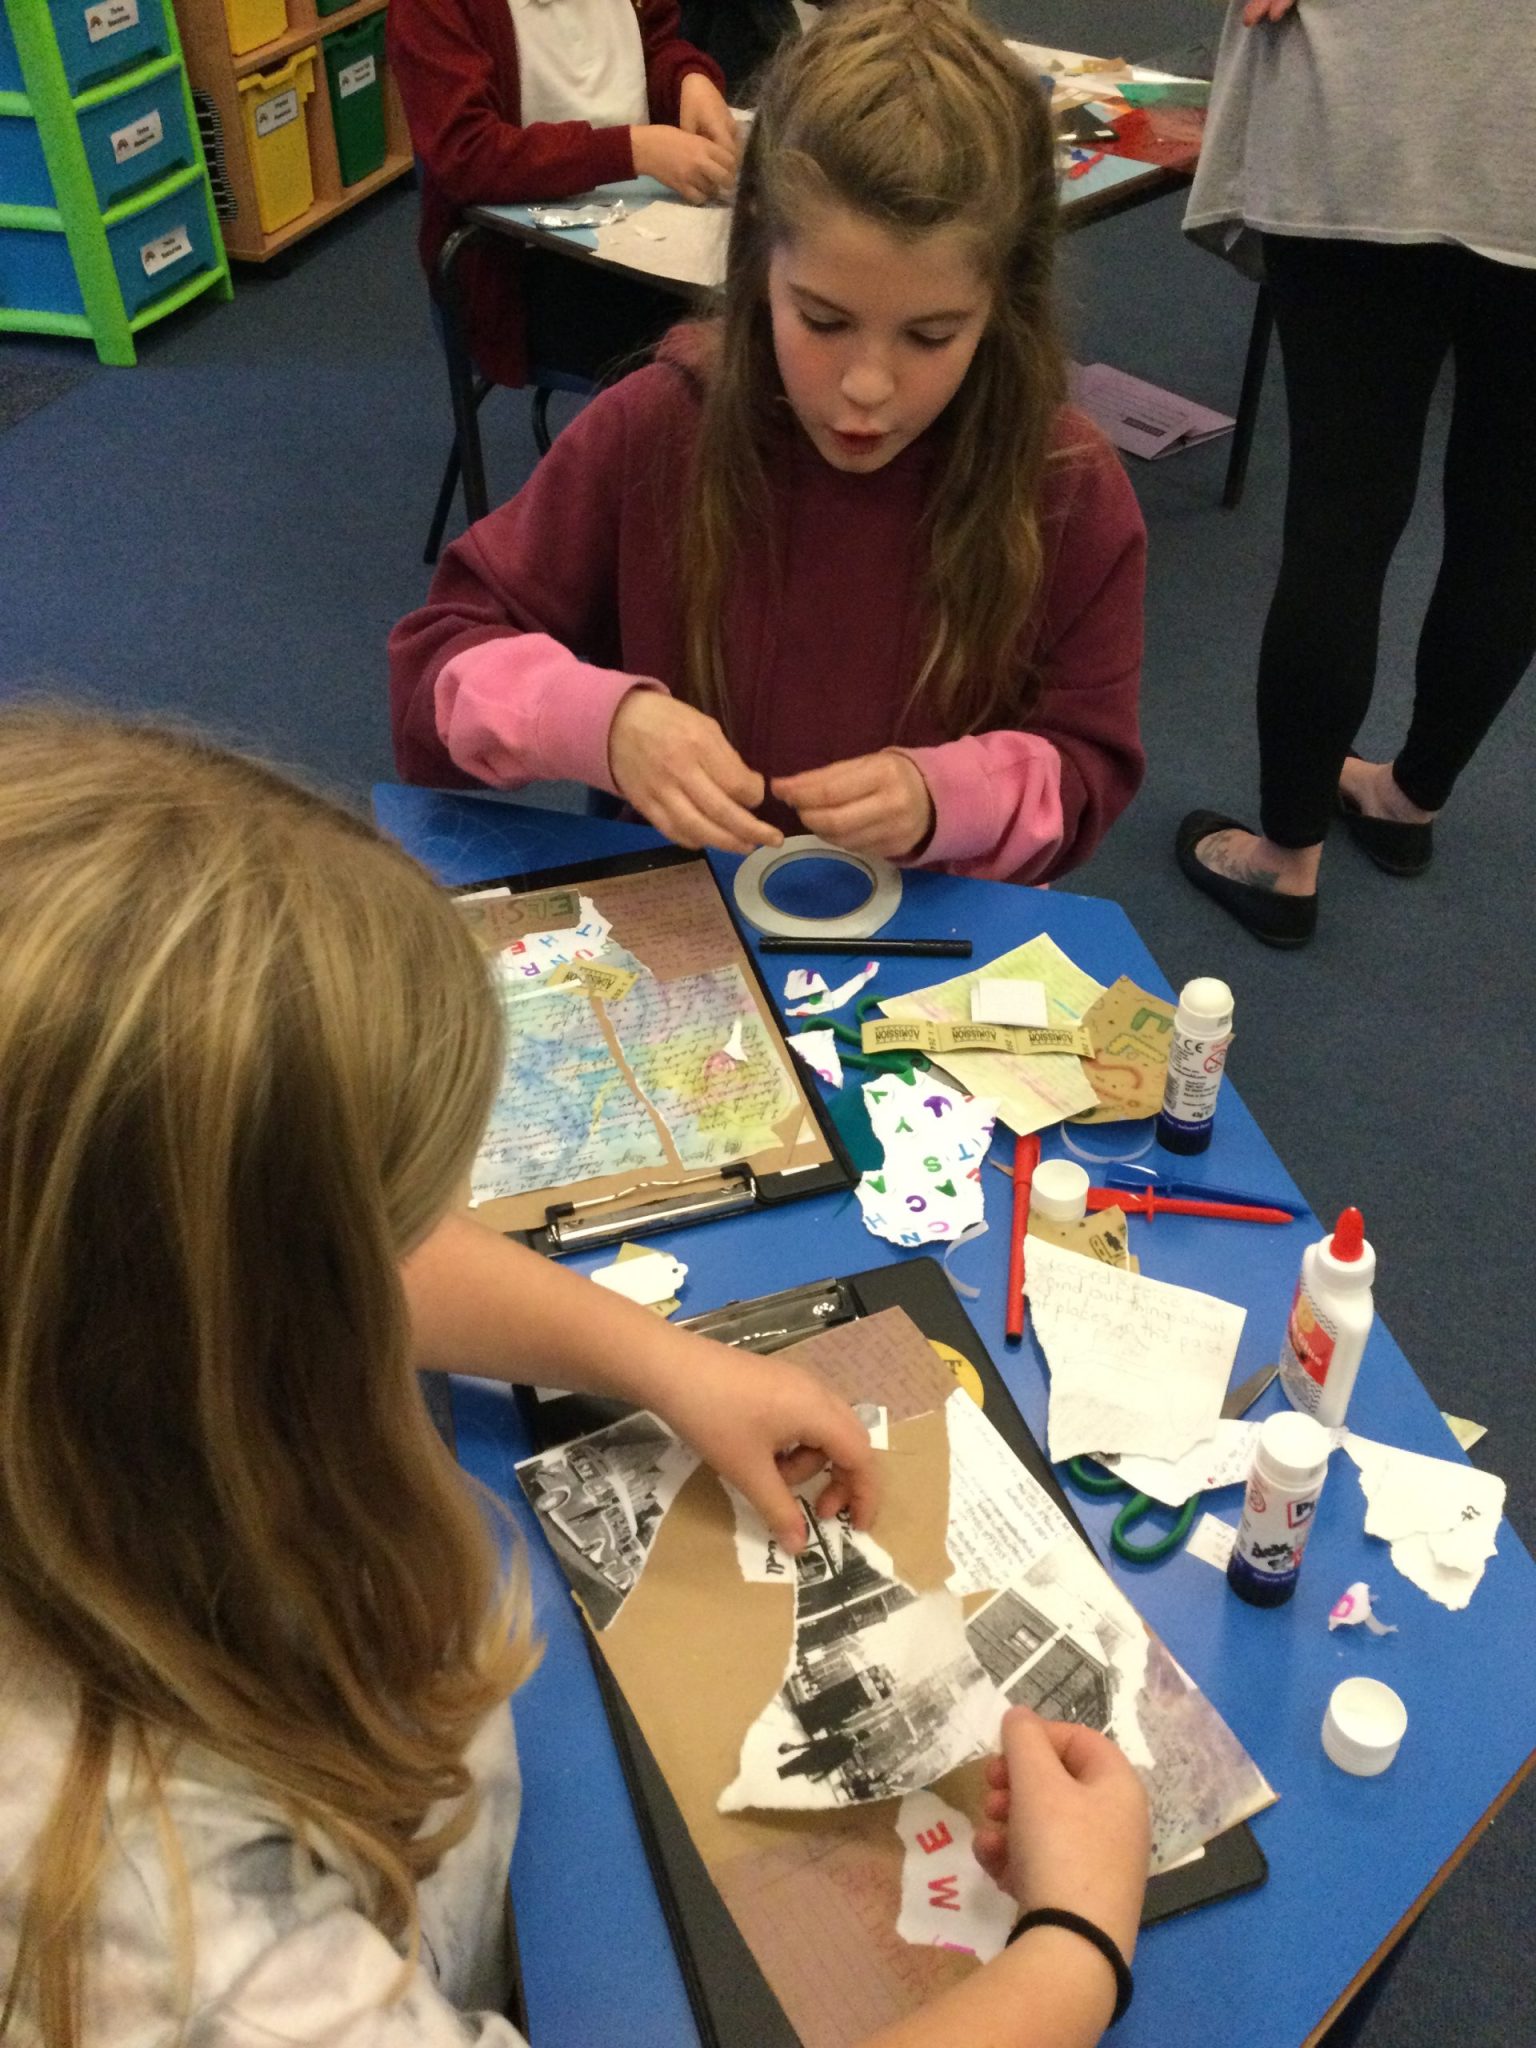 Two children seated at a table with glue, tape and an assortment of pictures which they are tearing up to use in their collage